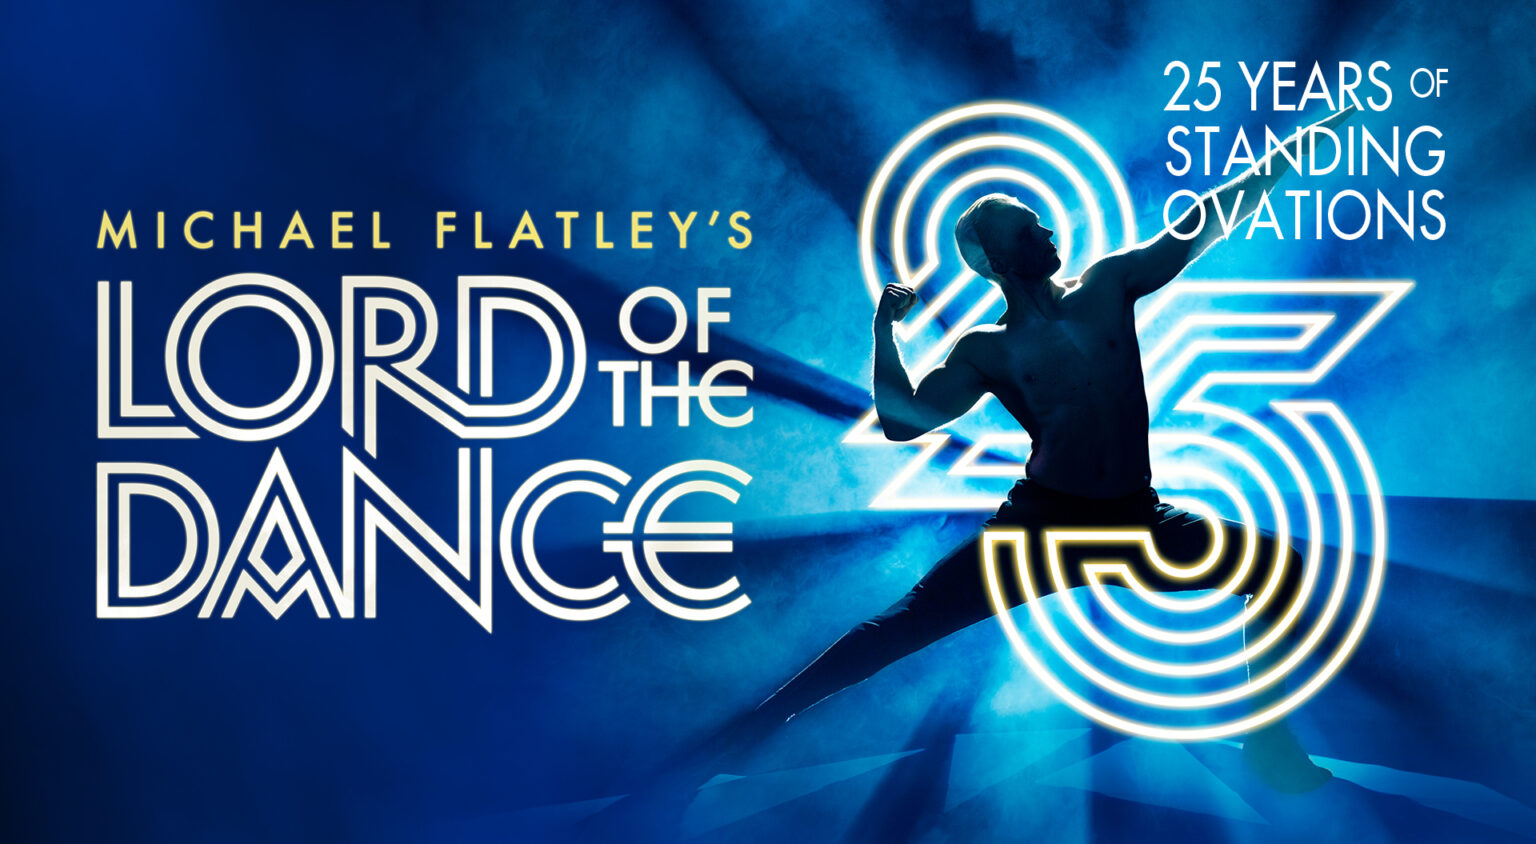 Lord of the Dance 25 years of Standing Ovations Alhambra Theatre